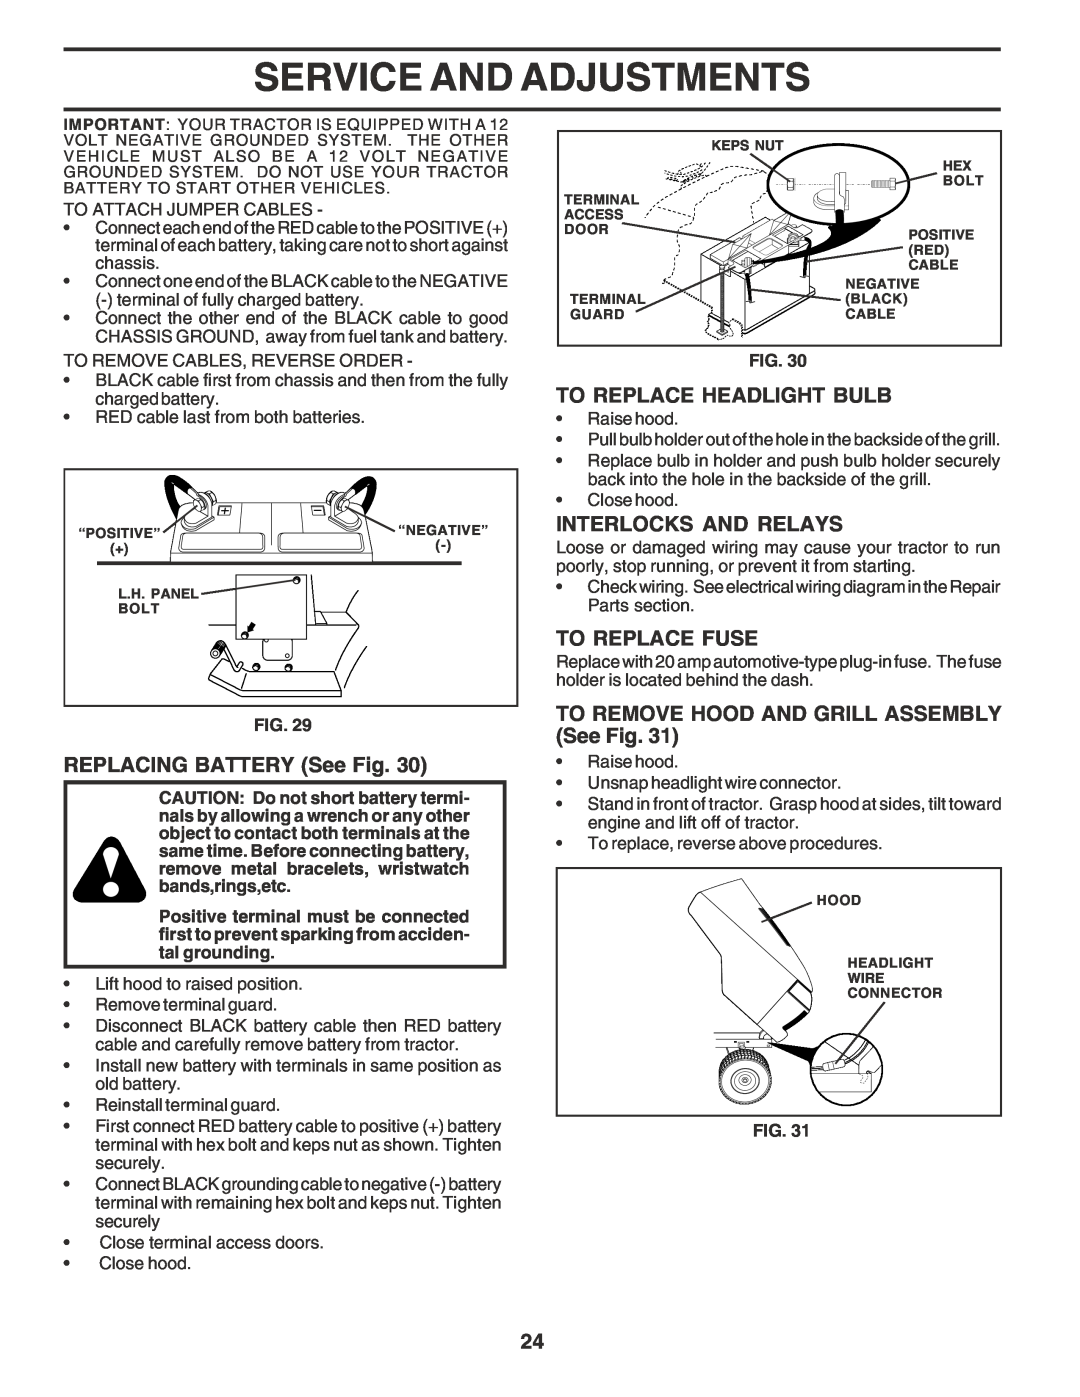 Poulan 180278 owner manual REPLACING BATTERY See Fig, To Replace Headlight Bulb, Interlocks And Relays, To Replace Fuse 